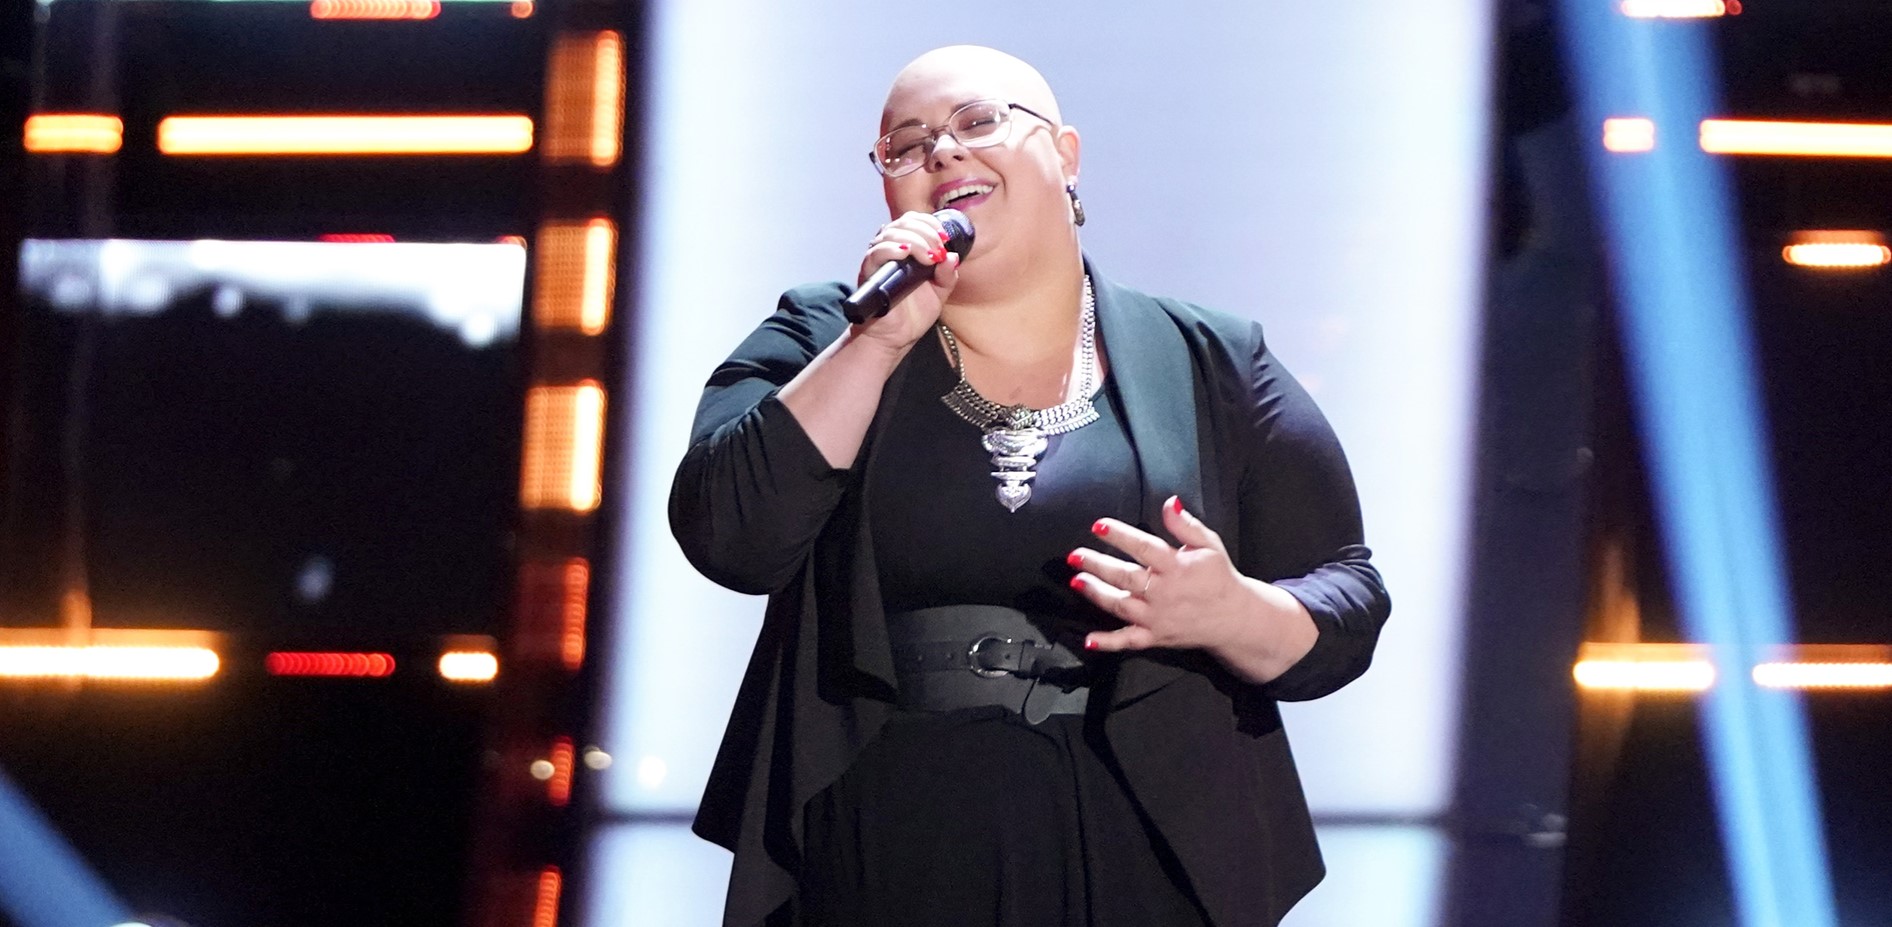 Why is The Voice’s Holly Forbes Bald? Does She Have Cancer?